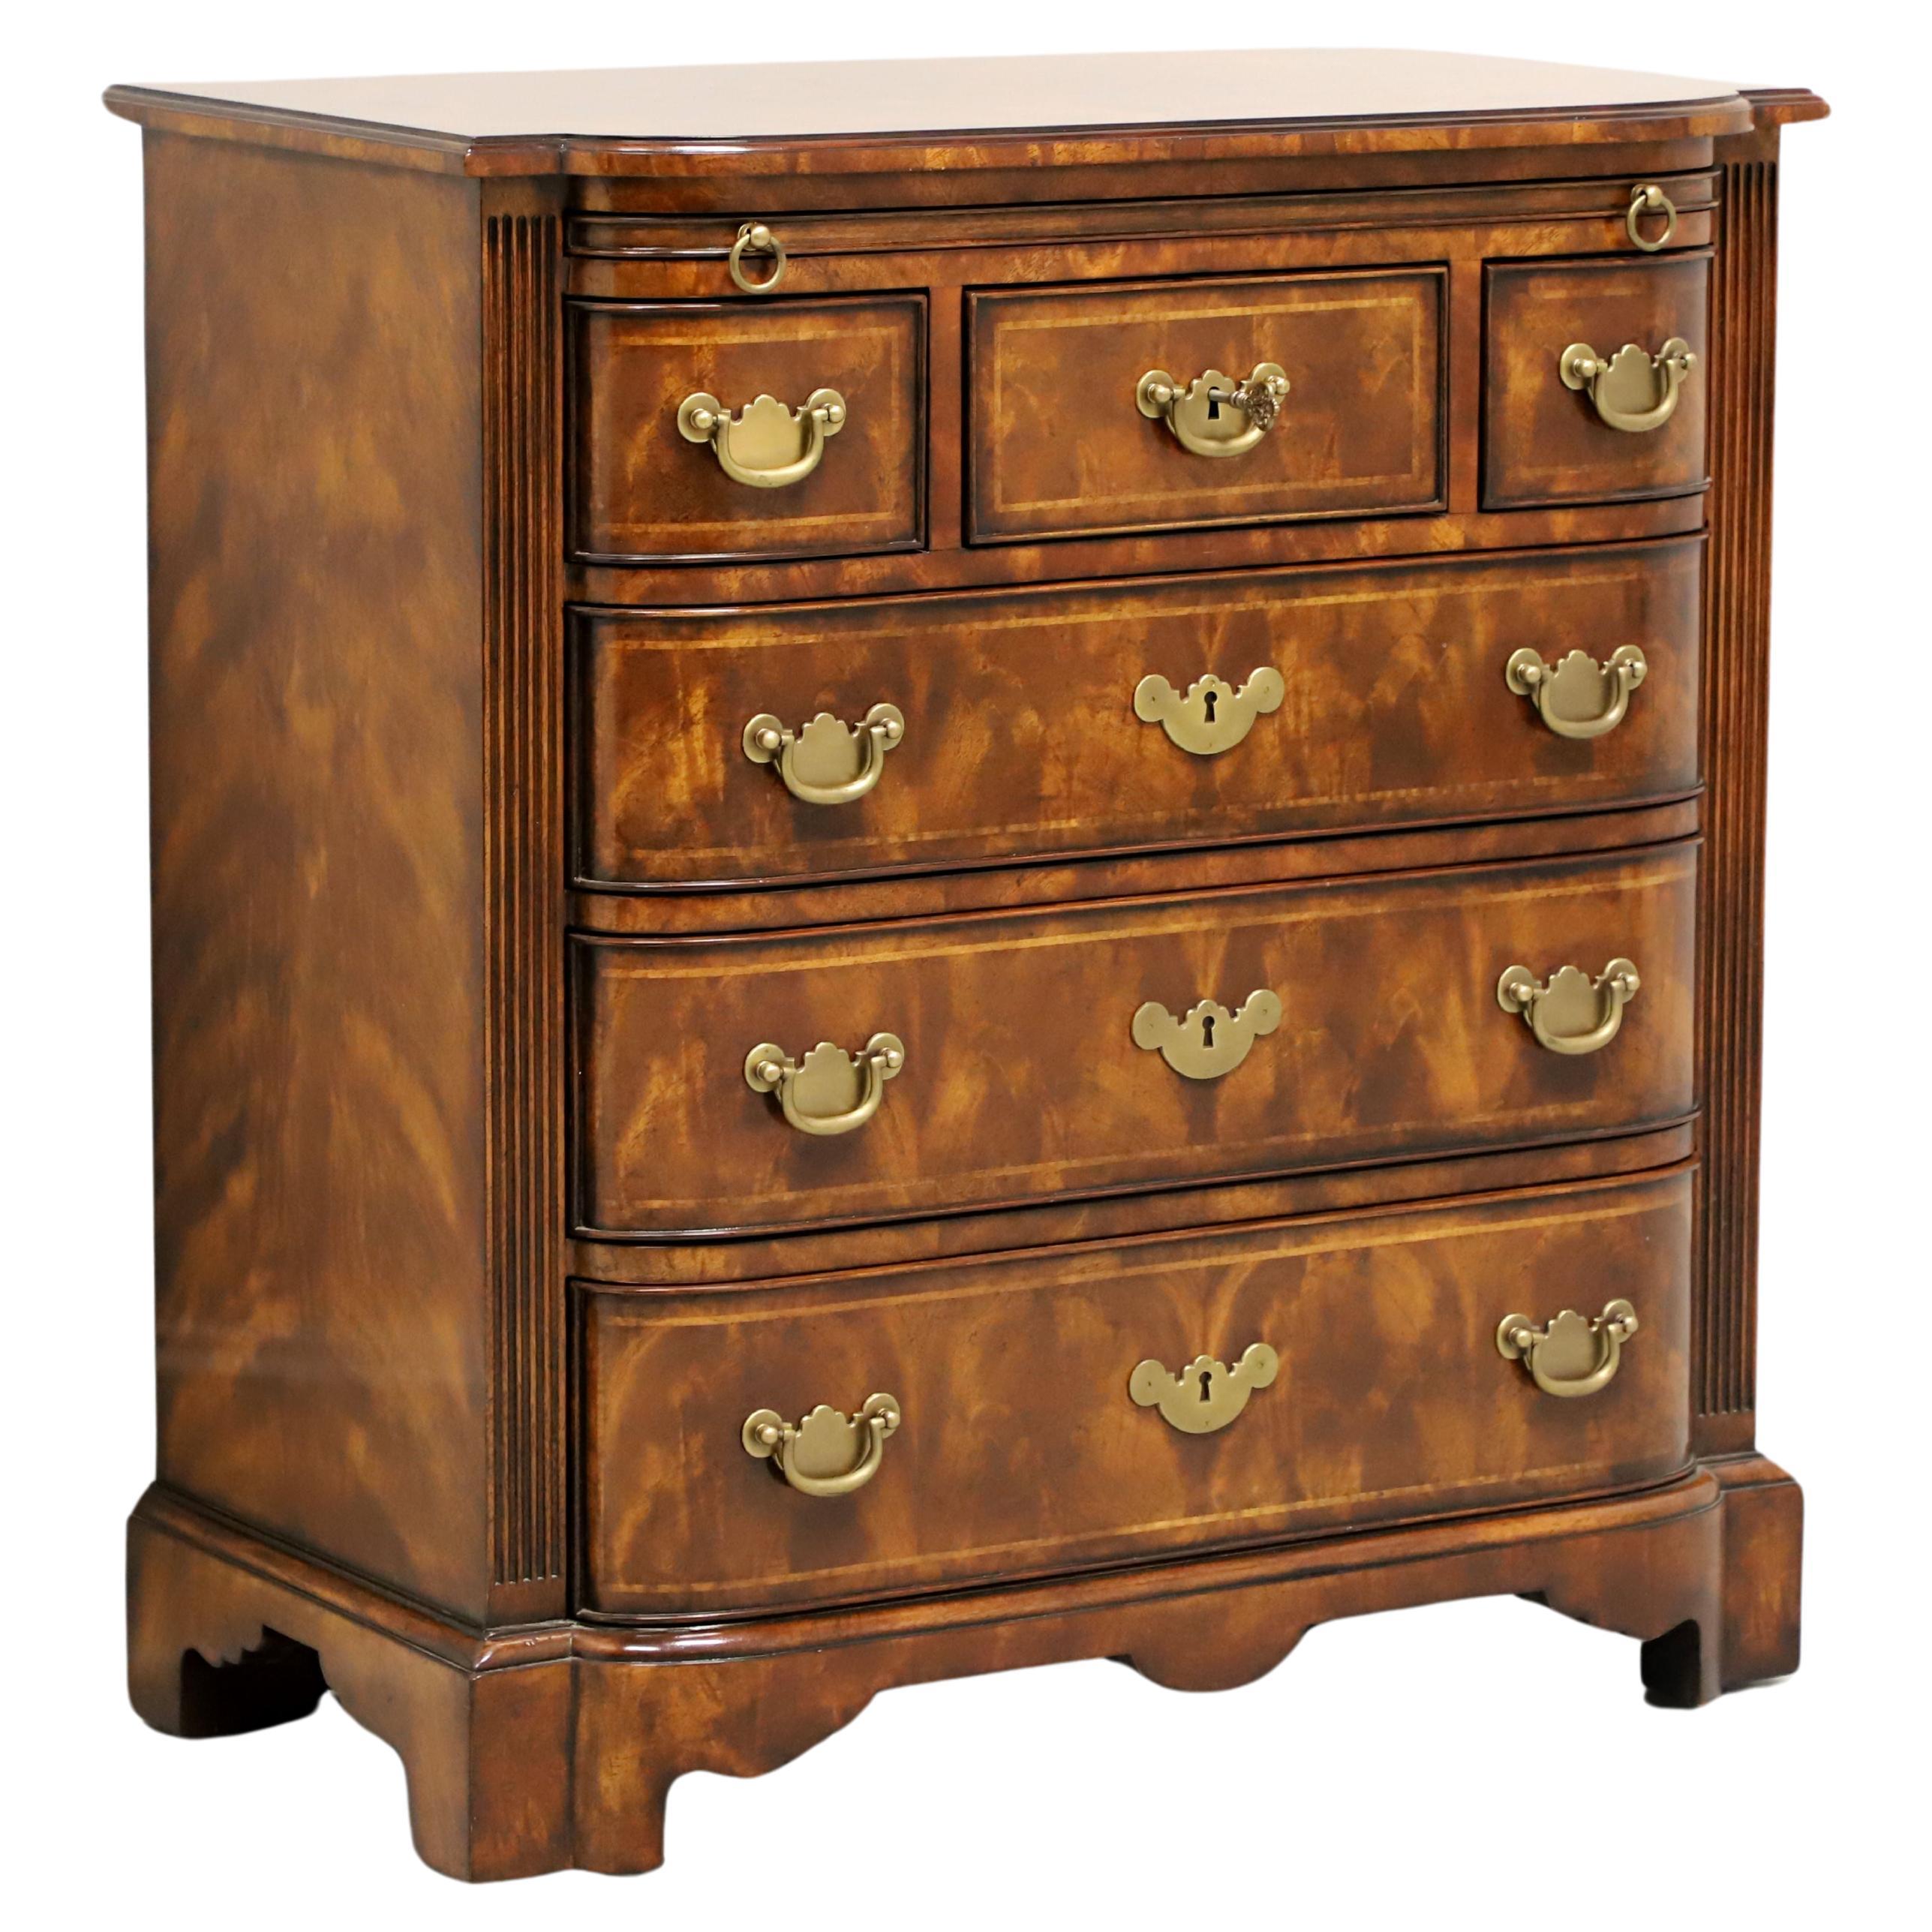 THEODORE ALEXANDER Rep•li•ca Burl Walnut Chippendale Bowfront Bachelor Chest For Sale